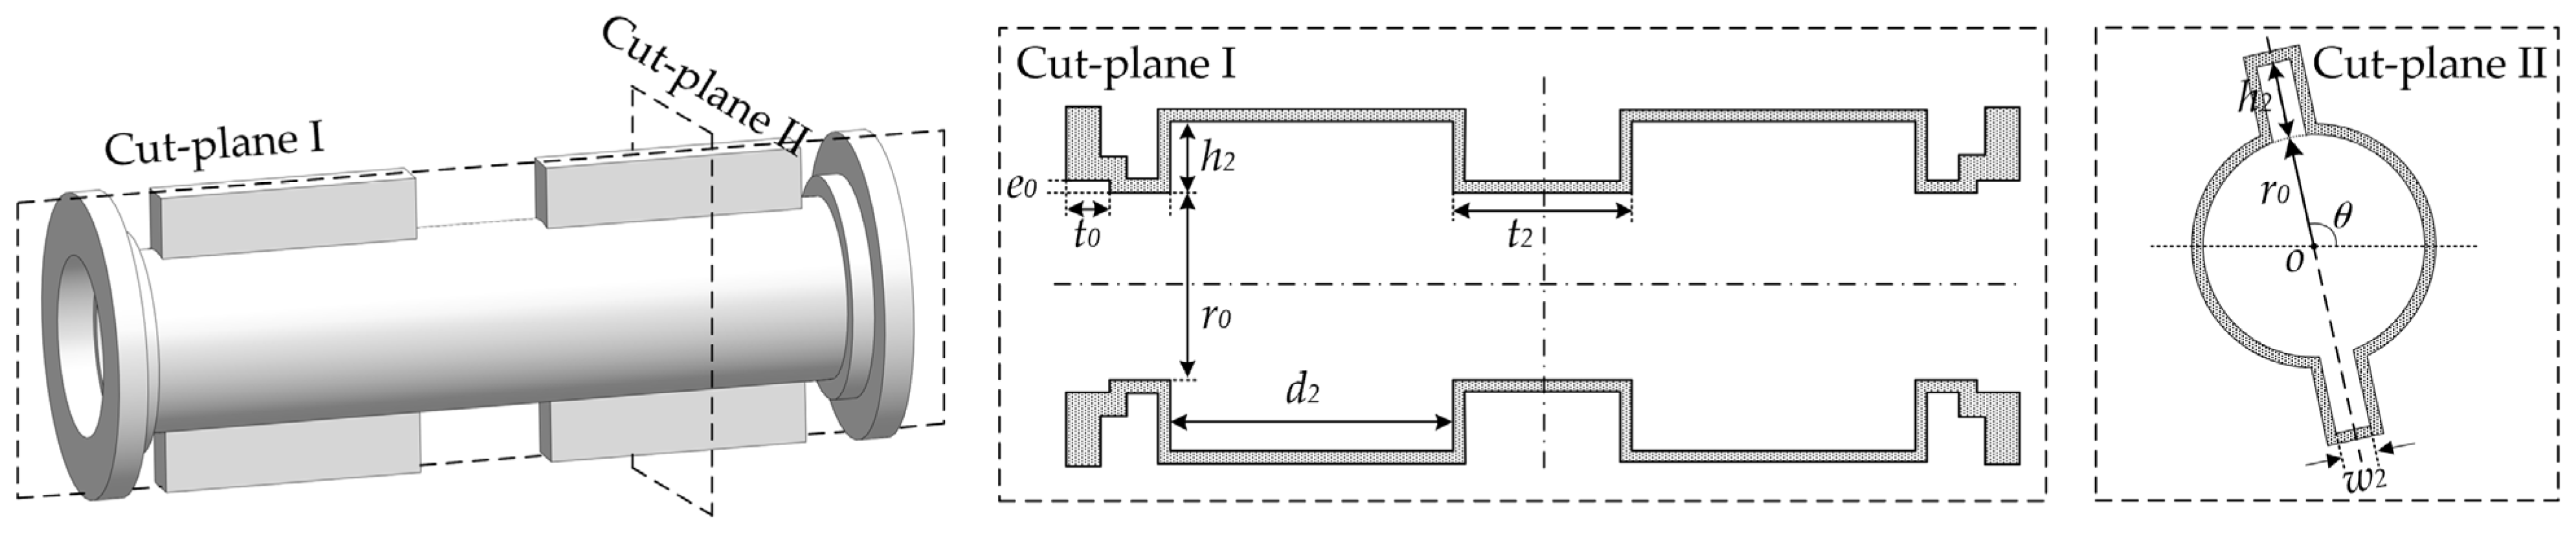 Electronics | Free Full-Text | A Novel High-Power Rotary Waveguide ...